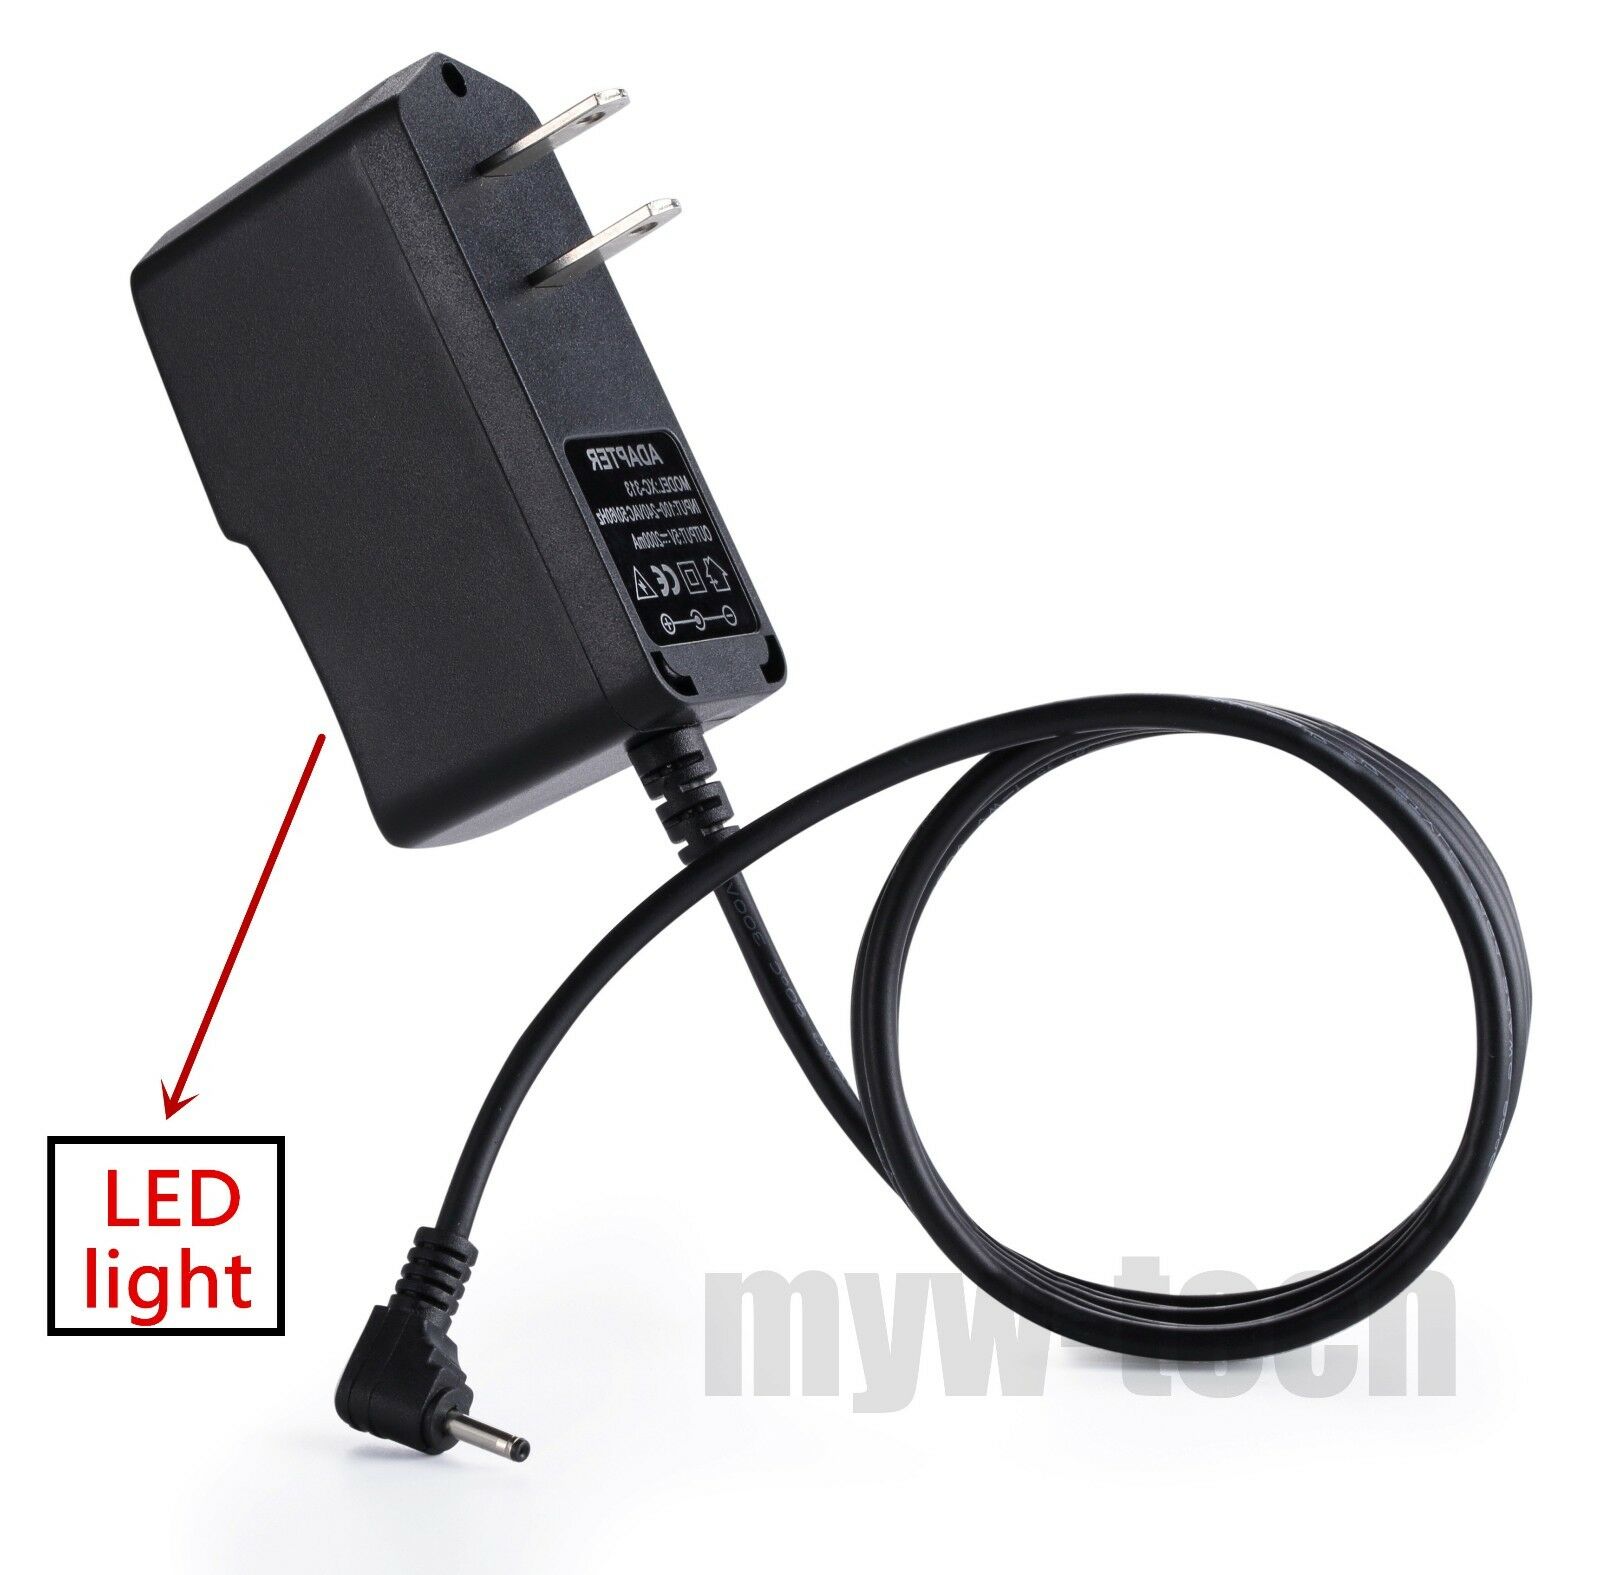 2A AC/DC Power Charger Adapter For Craig CMP741 a CMP741e CMP741d CMP741x Tablet 100% Brand New, High Quality AC Wall P